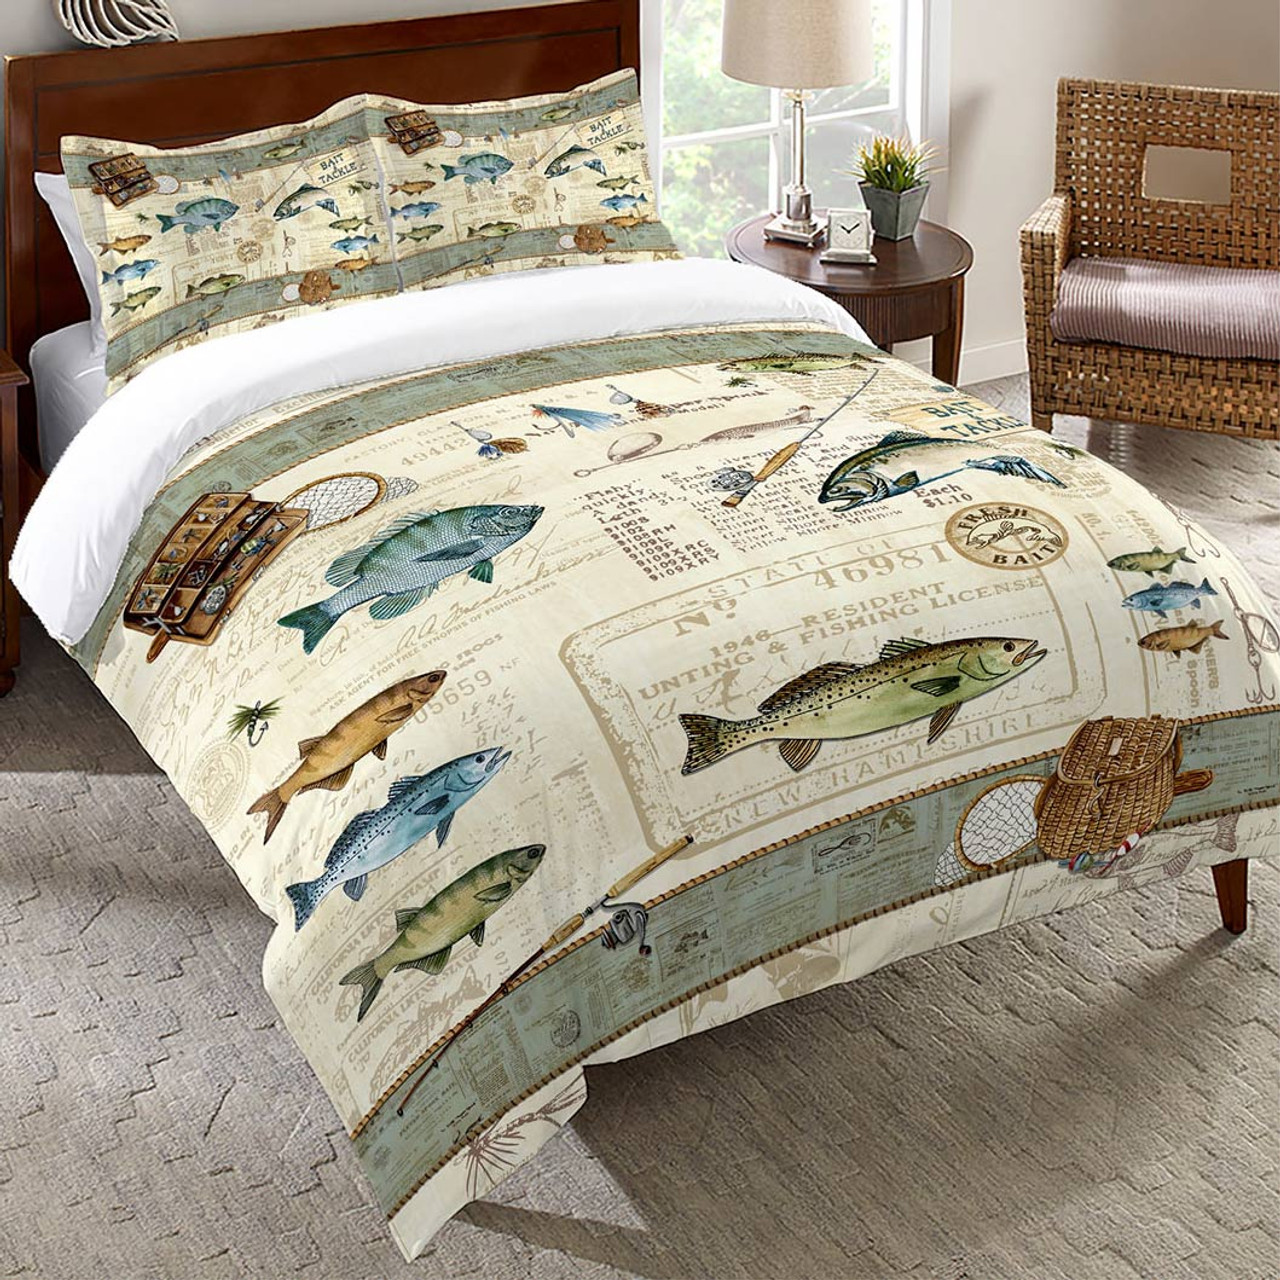 Rustic Bedding: King Size License to Fish Comforter